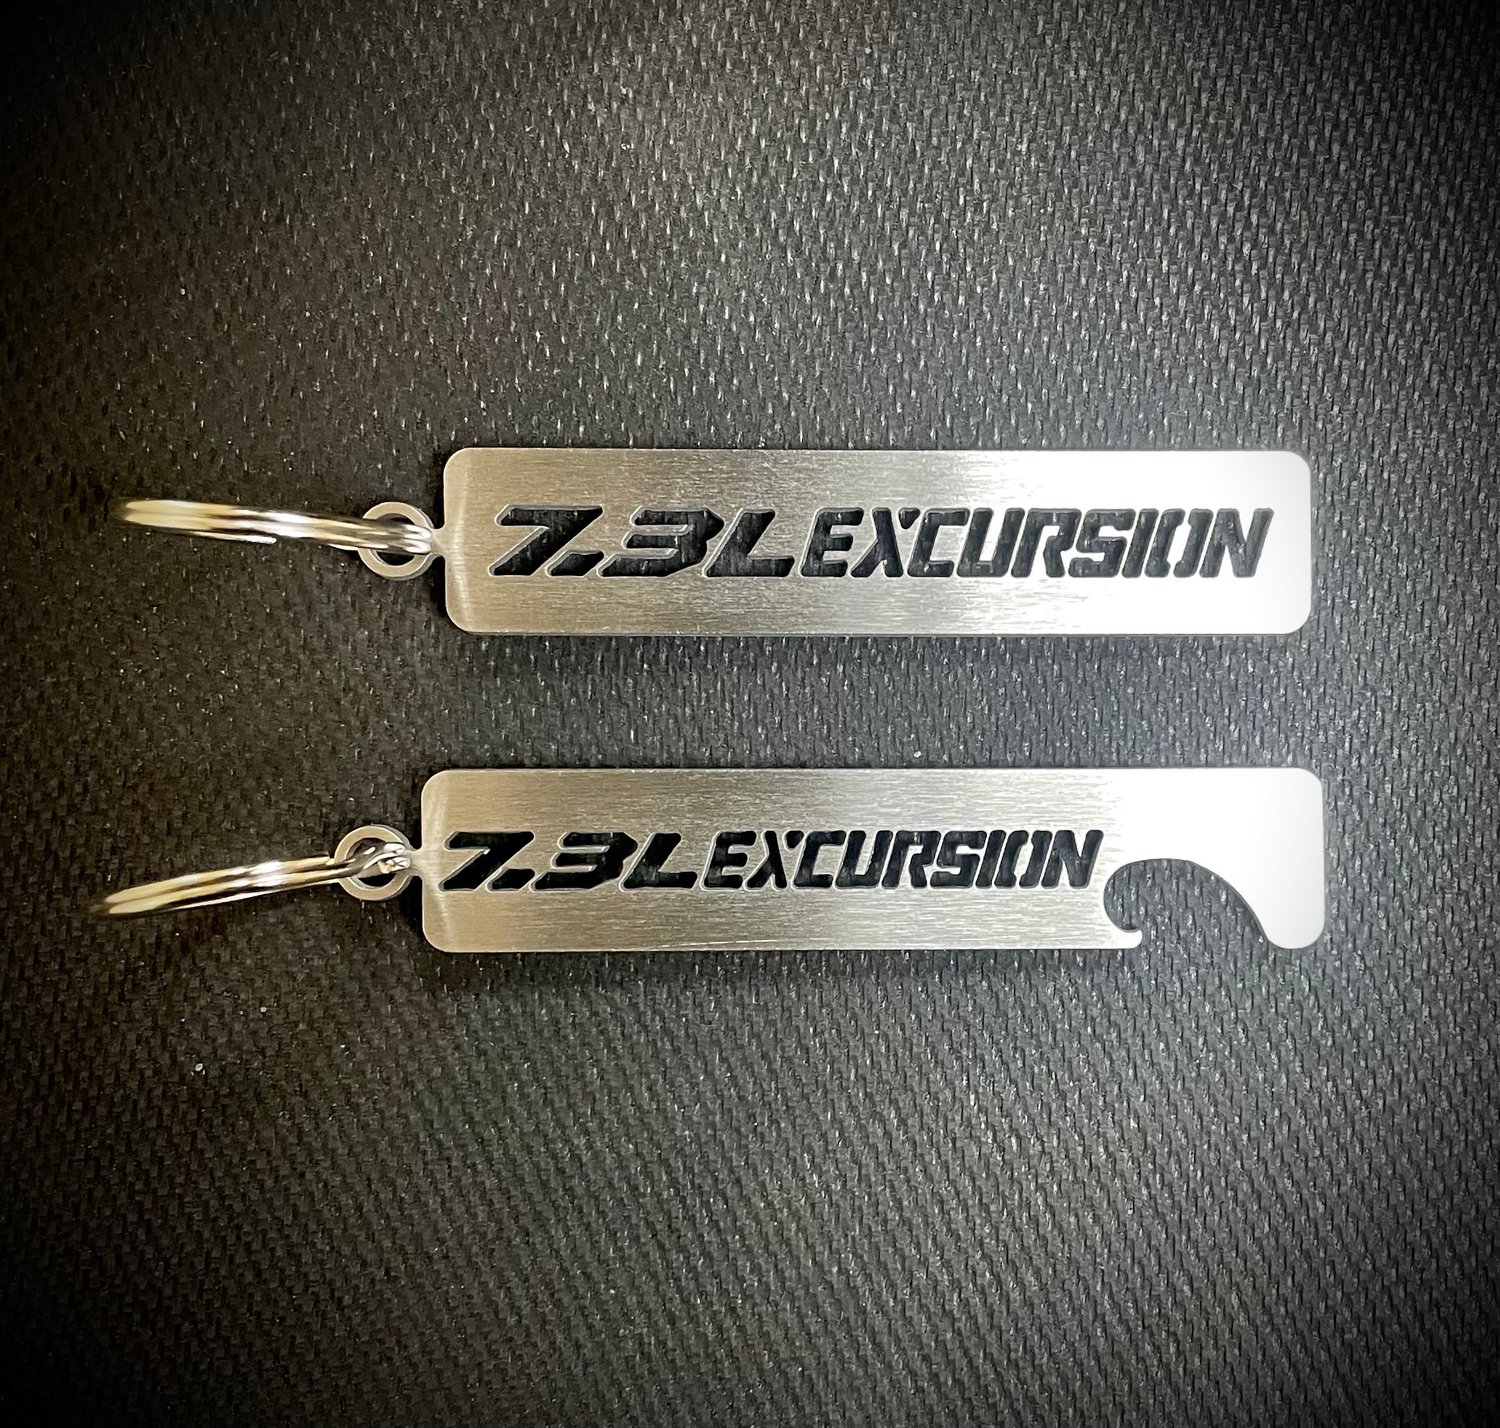 For 7.3 Excursion Enthusiasts 